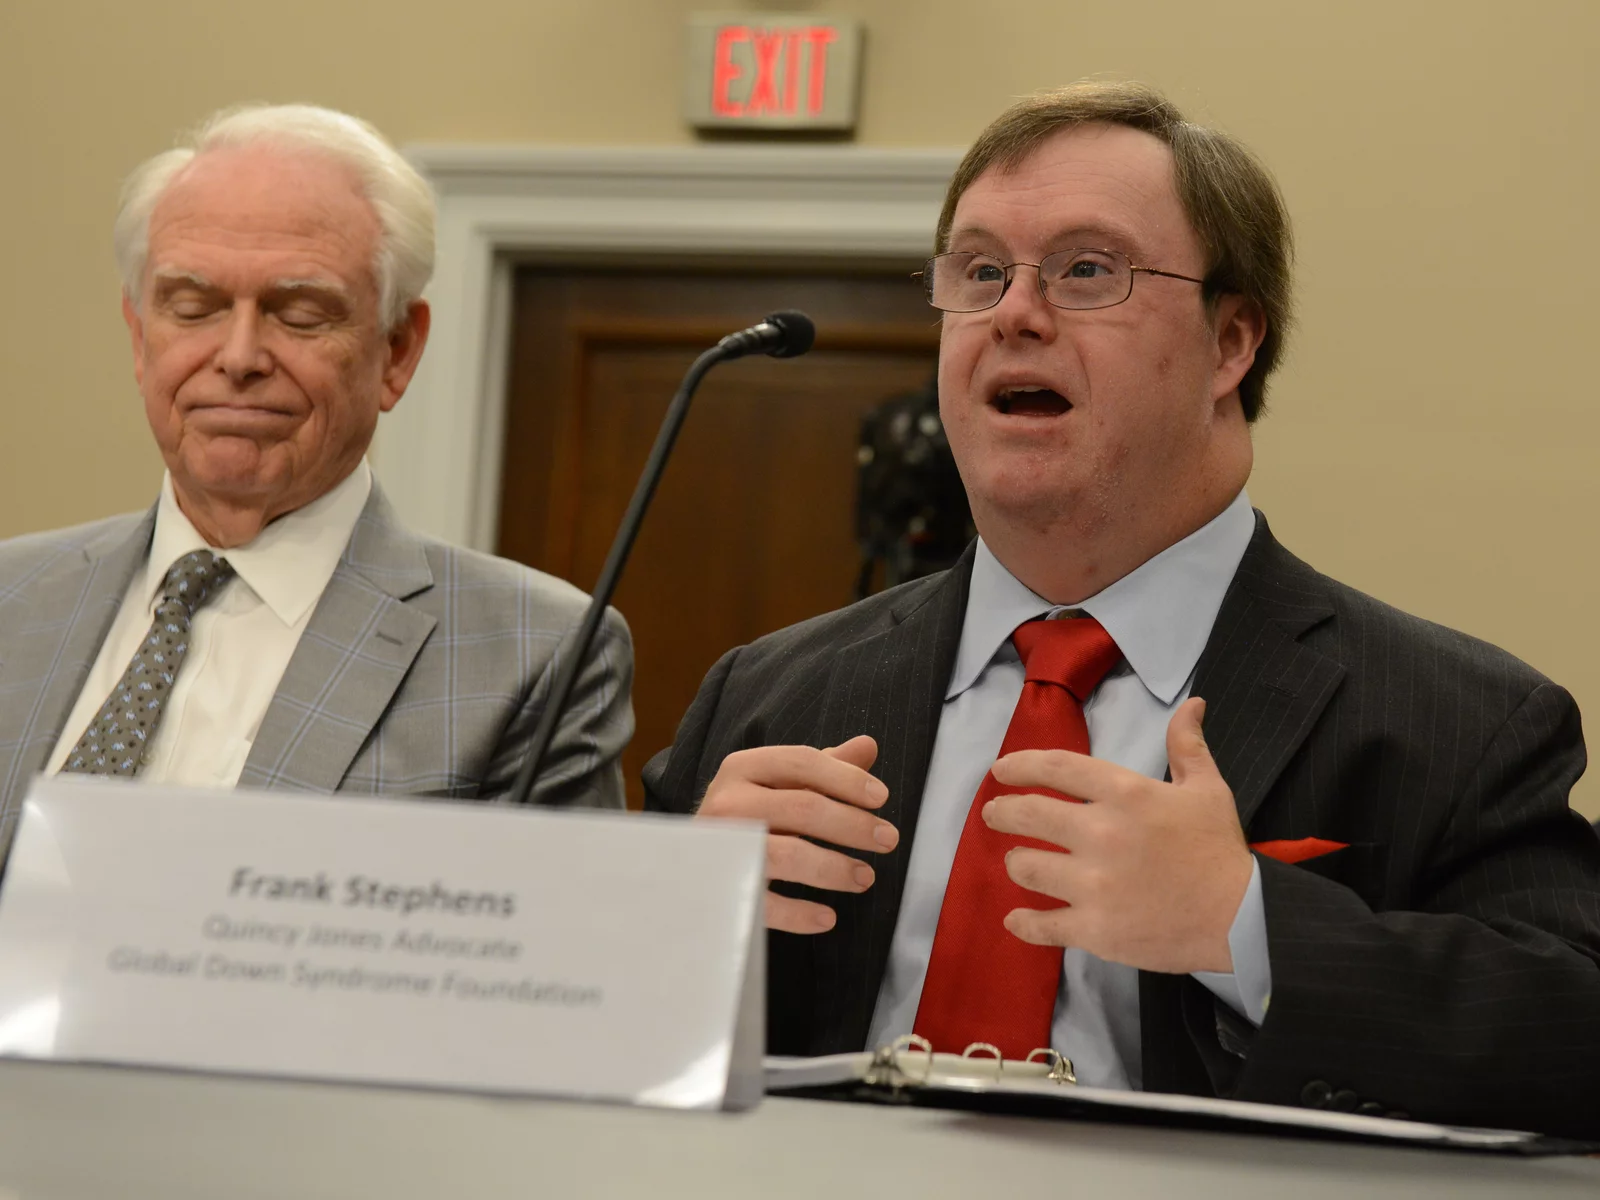 Image of self-advocate Frank Stephens speaking in front of US Congress